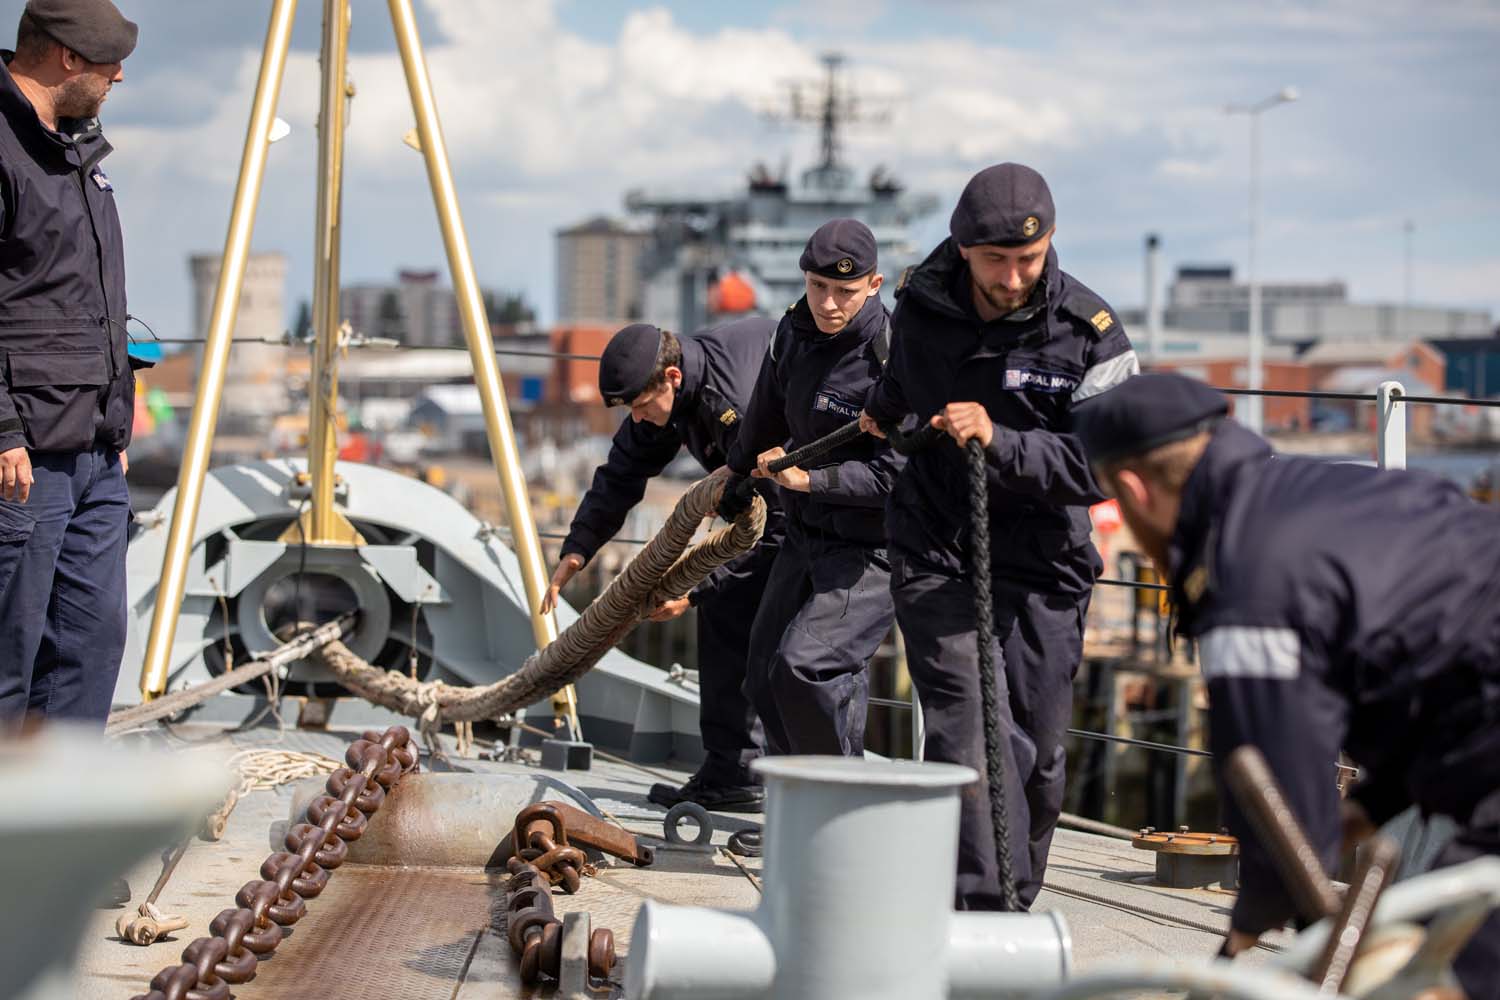 Royal Navy HMS Lancaster on Weapons Trials After Two-Year Refit